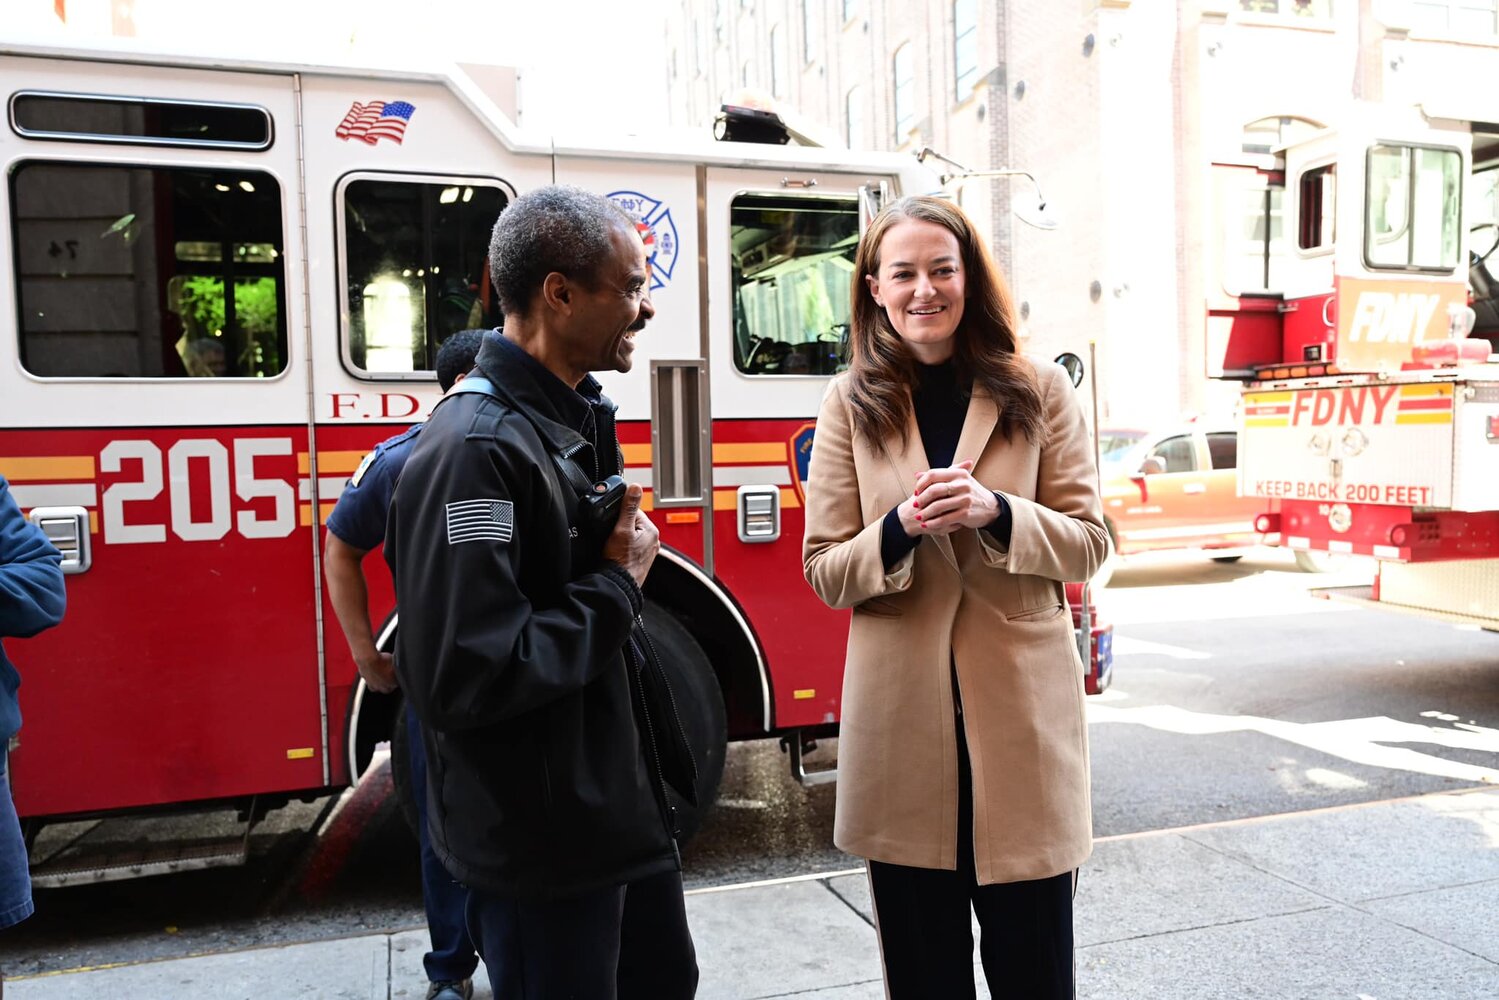 FDNY Commissioner Laura Kavanagh attended a retirement ceremony for Firefighter Robert Thomas of Engine 205 last month. Kavanagh is being sued by several department higher-ups who accuse her of age discrimination. The suit, filed in Brooklyn Supreme Court, also allege that she slowed the investigation into the October stabbing death of EMS Lieutenant Alison Russo-Elling.